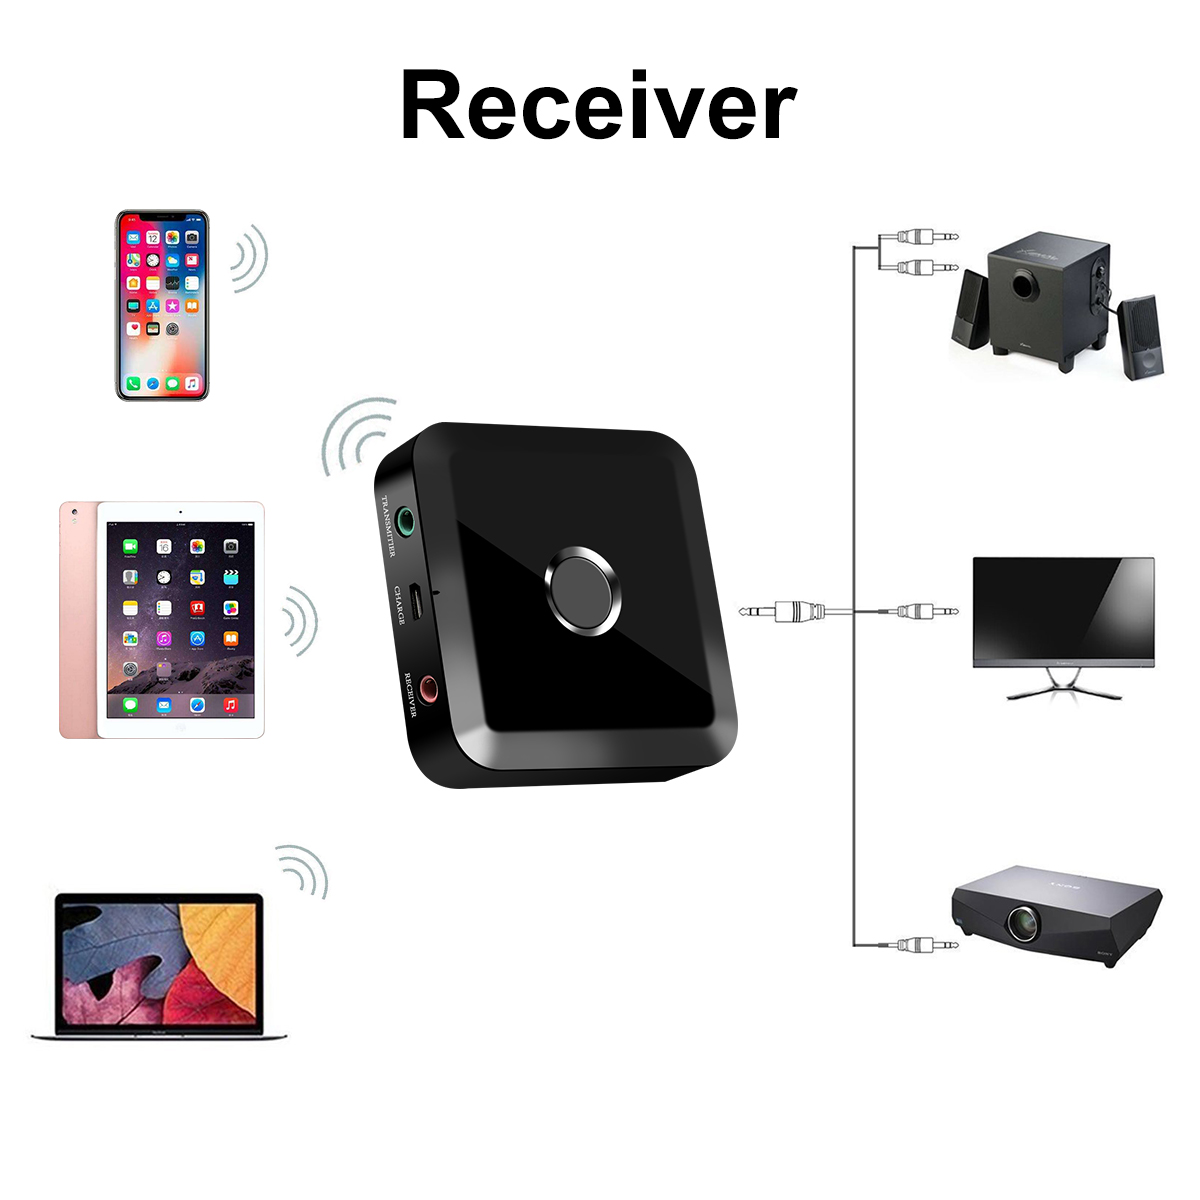 Wireless-TransmitterReceiver-bluetooth-40-Adapter-2-in-1-Wireless-35mm--RCA-Audio-Adapter-for-TV-Hea-1890700-1